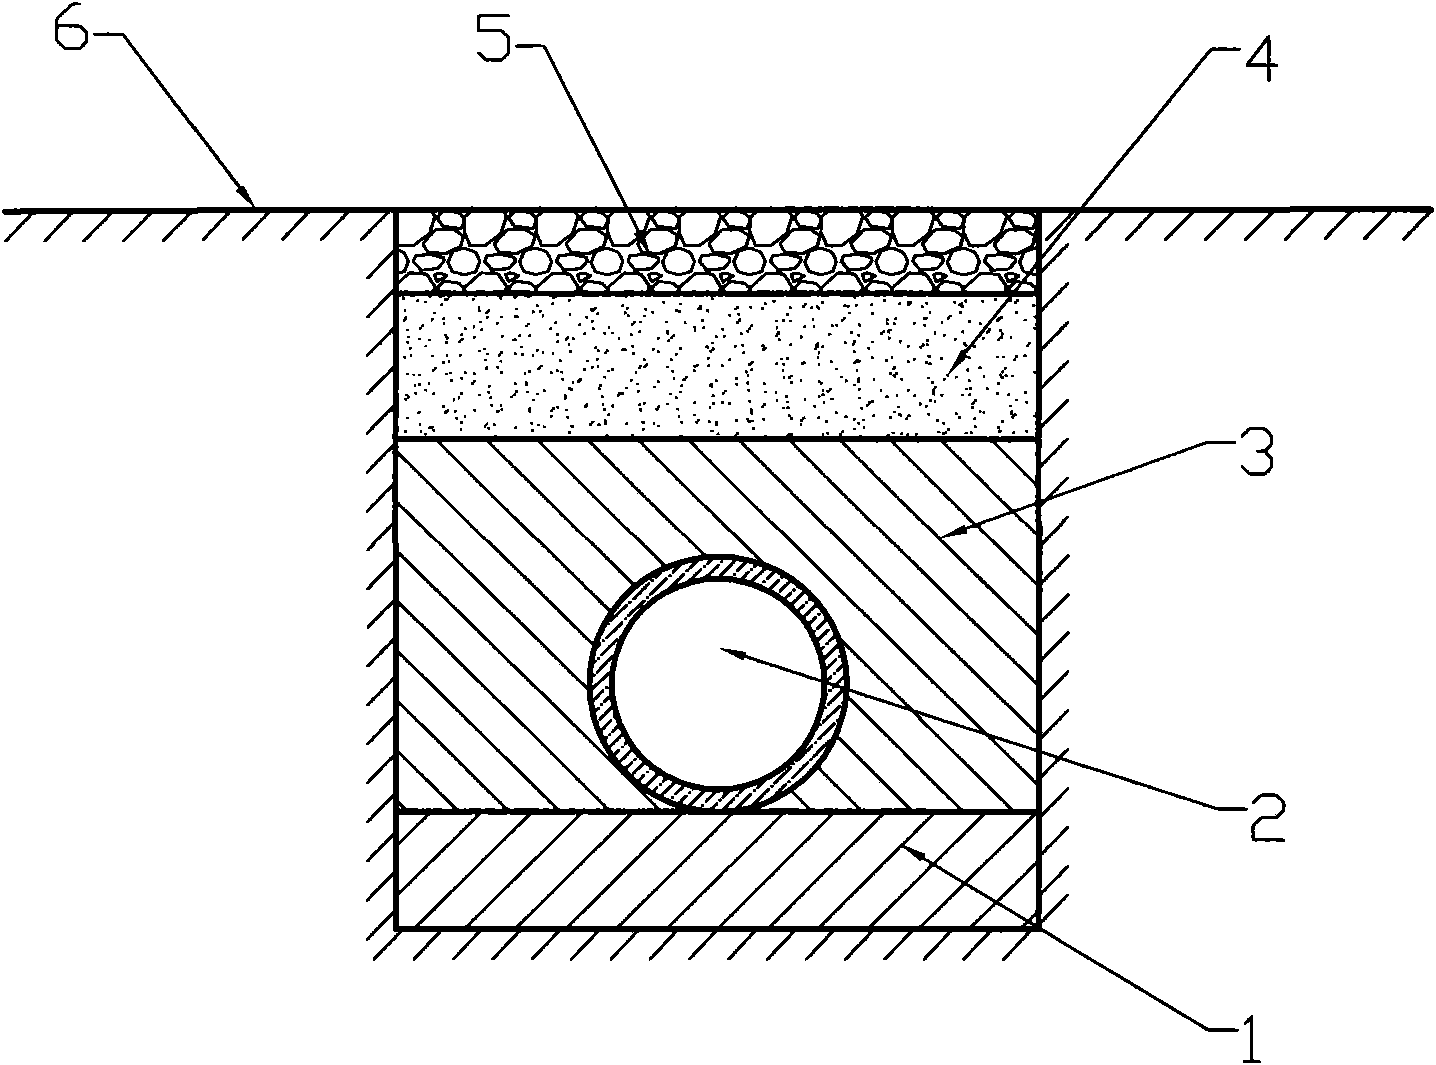 Construction method for laying water pipes